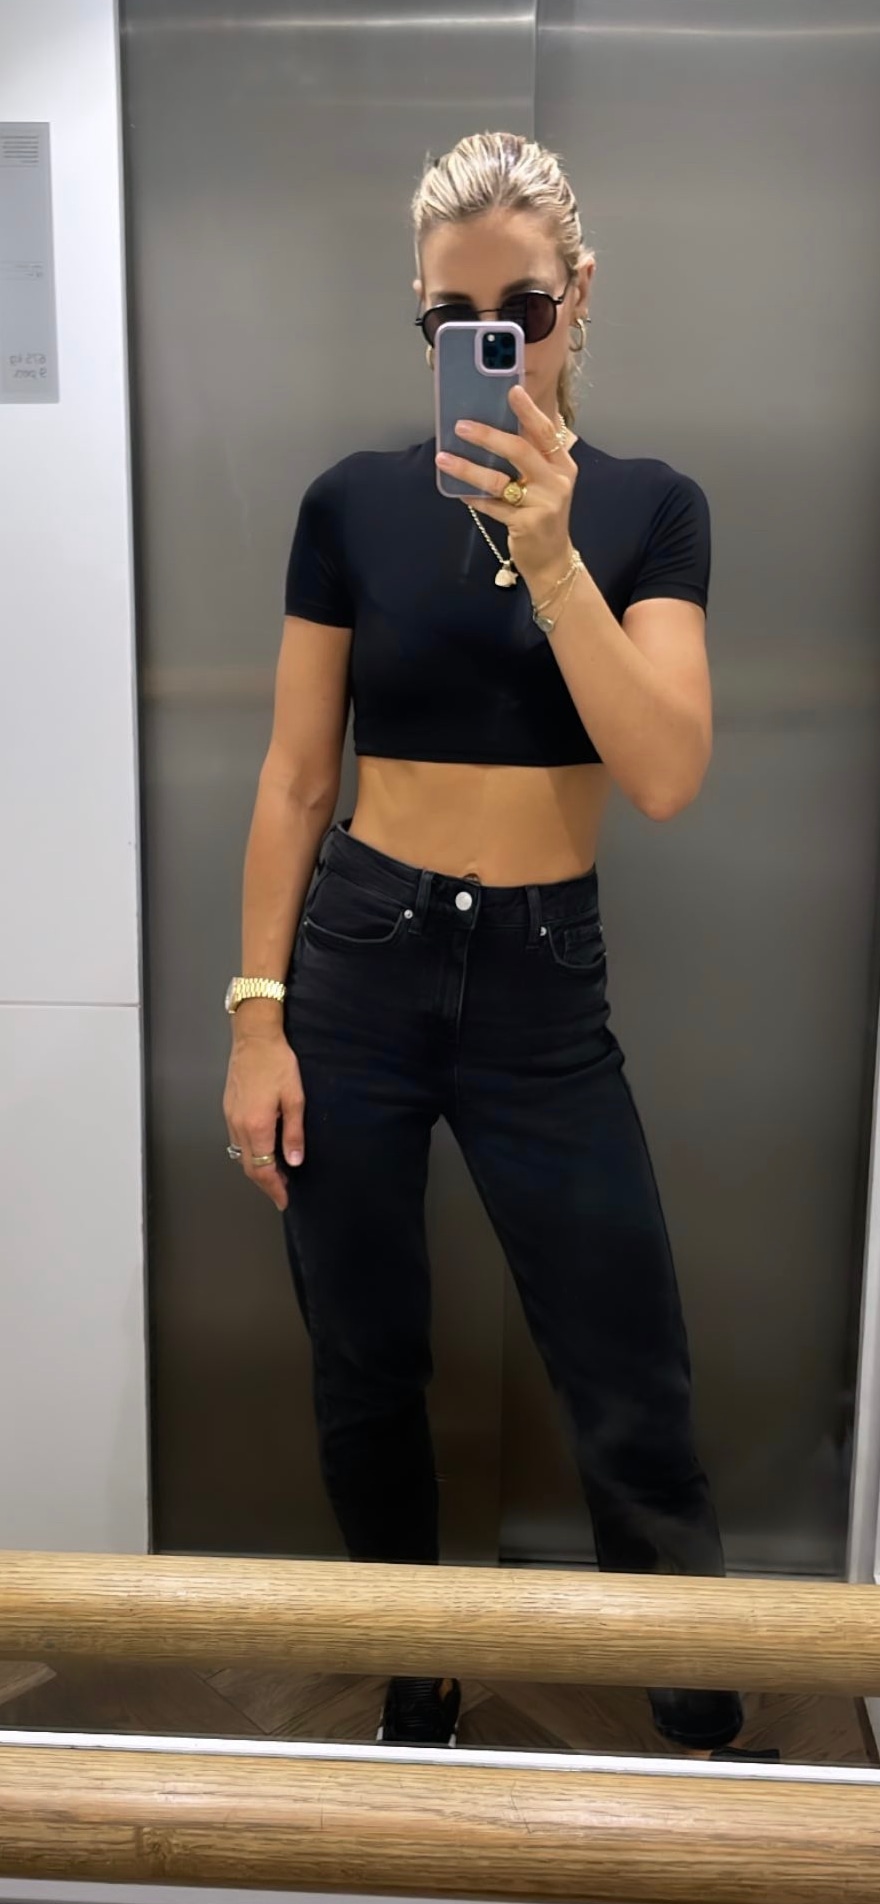 vogue williams m and s jeans and crop top